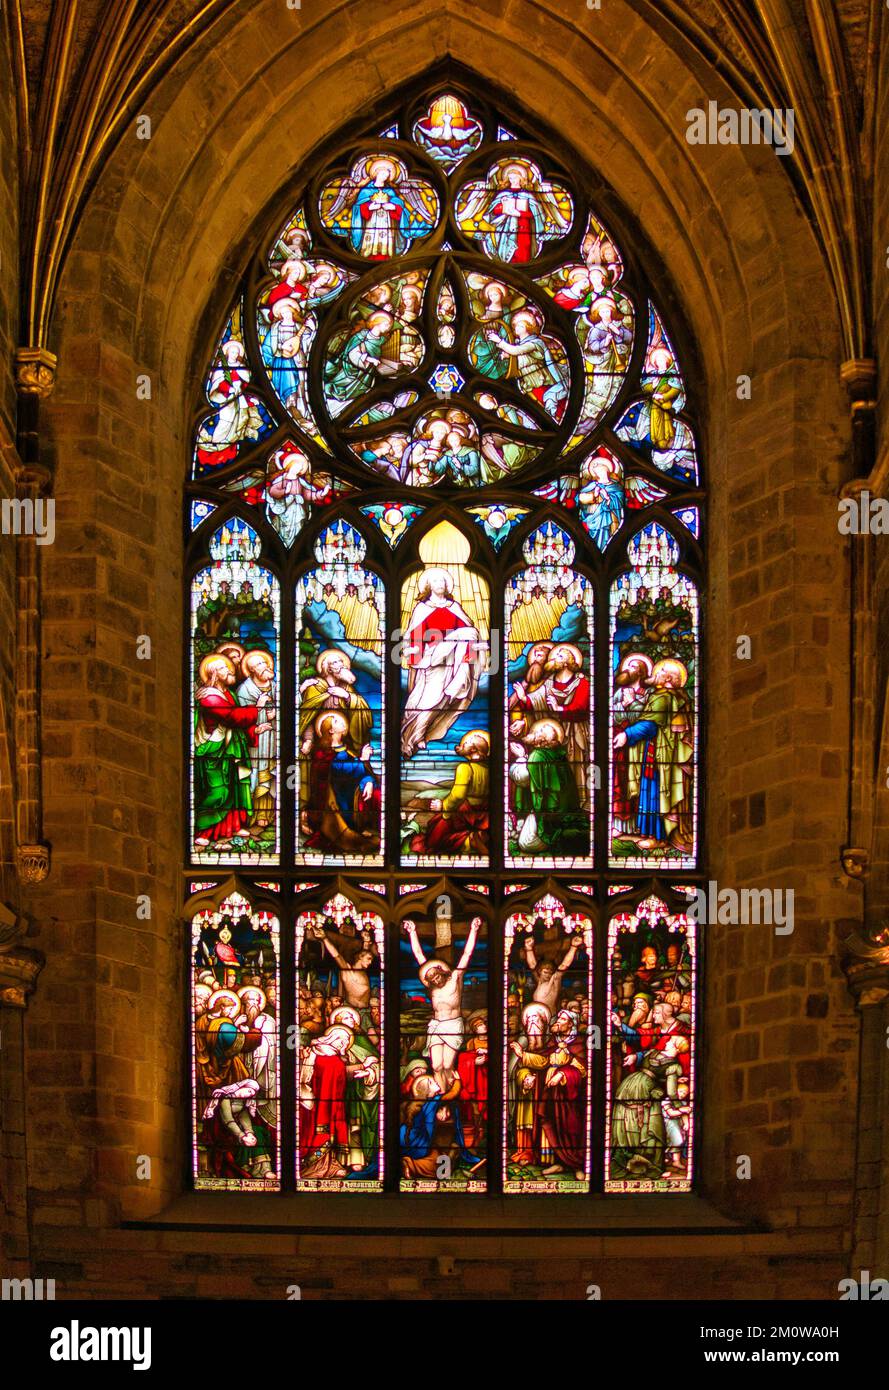 St Giles' Cathedral, Edinburgh - Jesus ascends into heaven in the east window by Ballantine and Son (1877). Stock Photo